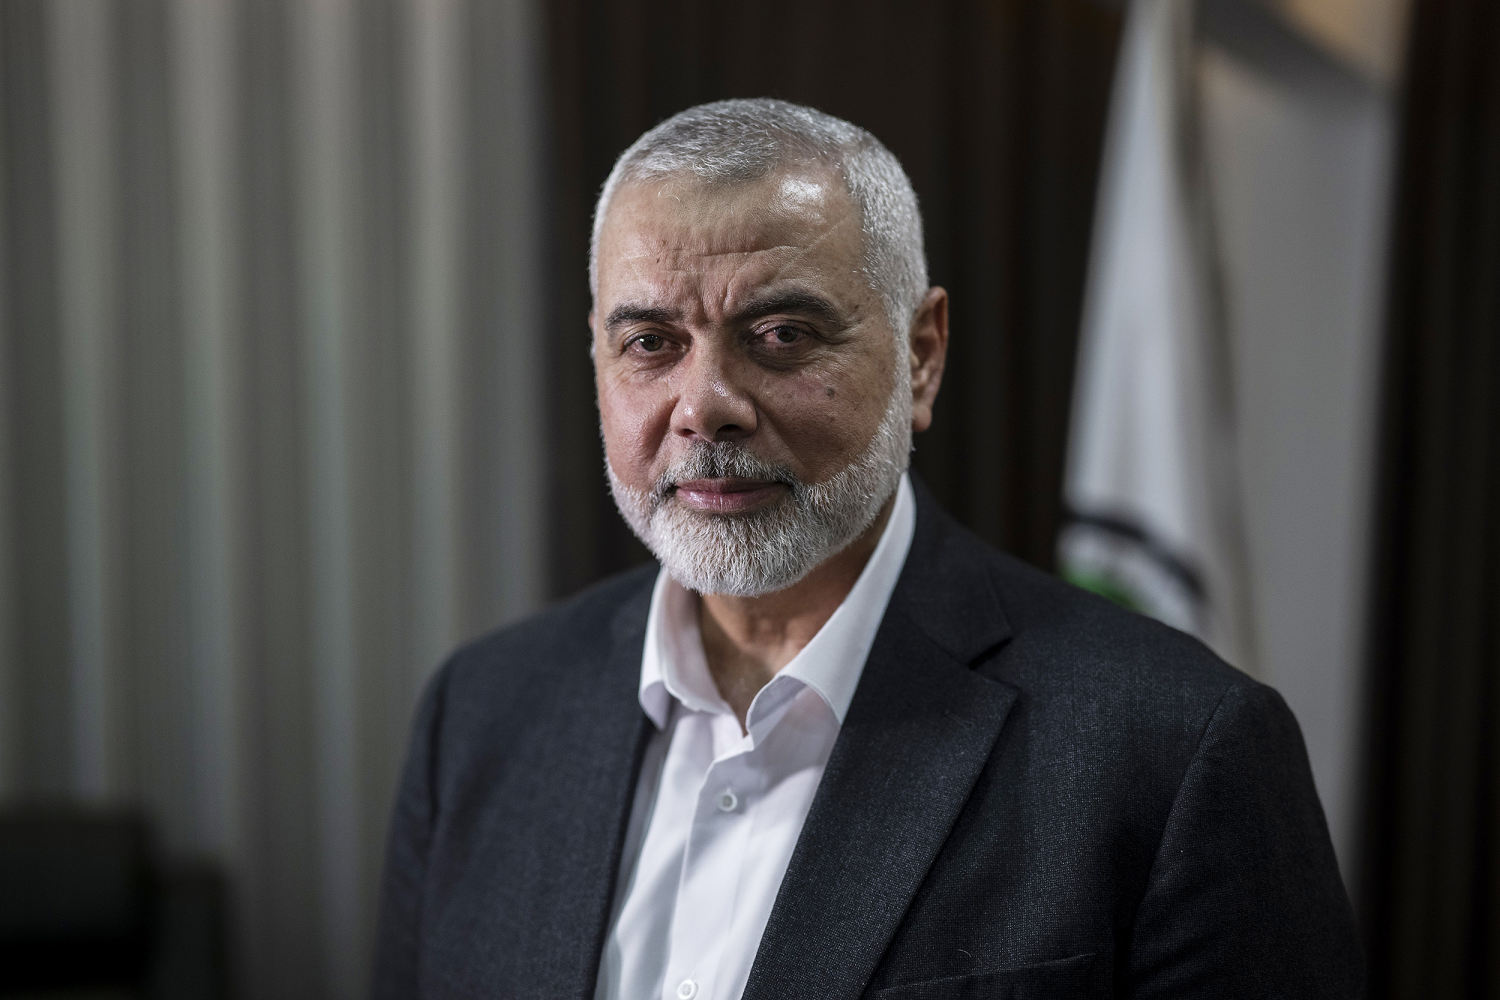 Hamas says political leader Ismail Haniyeh killed and JD Vance addresses his rocky debut: Morning Rundown